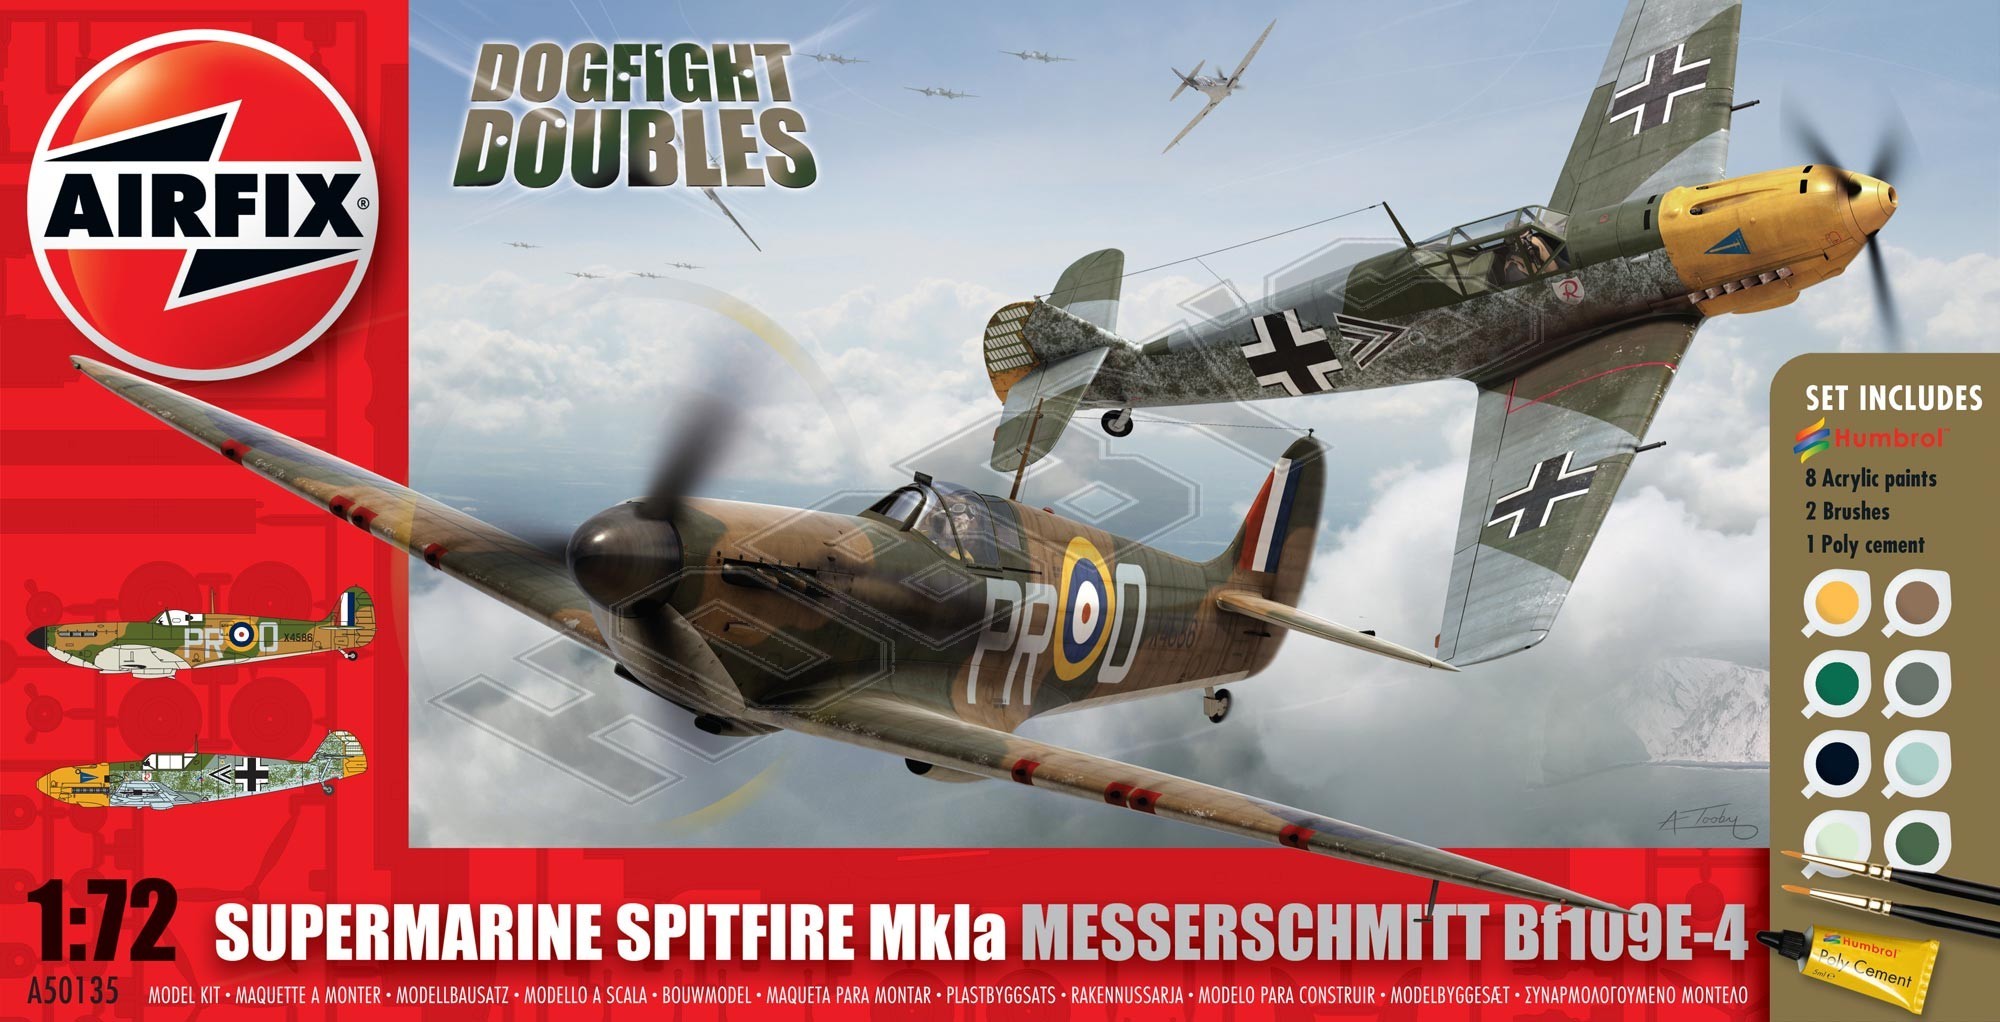 Airfix - Dogfight Doubles